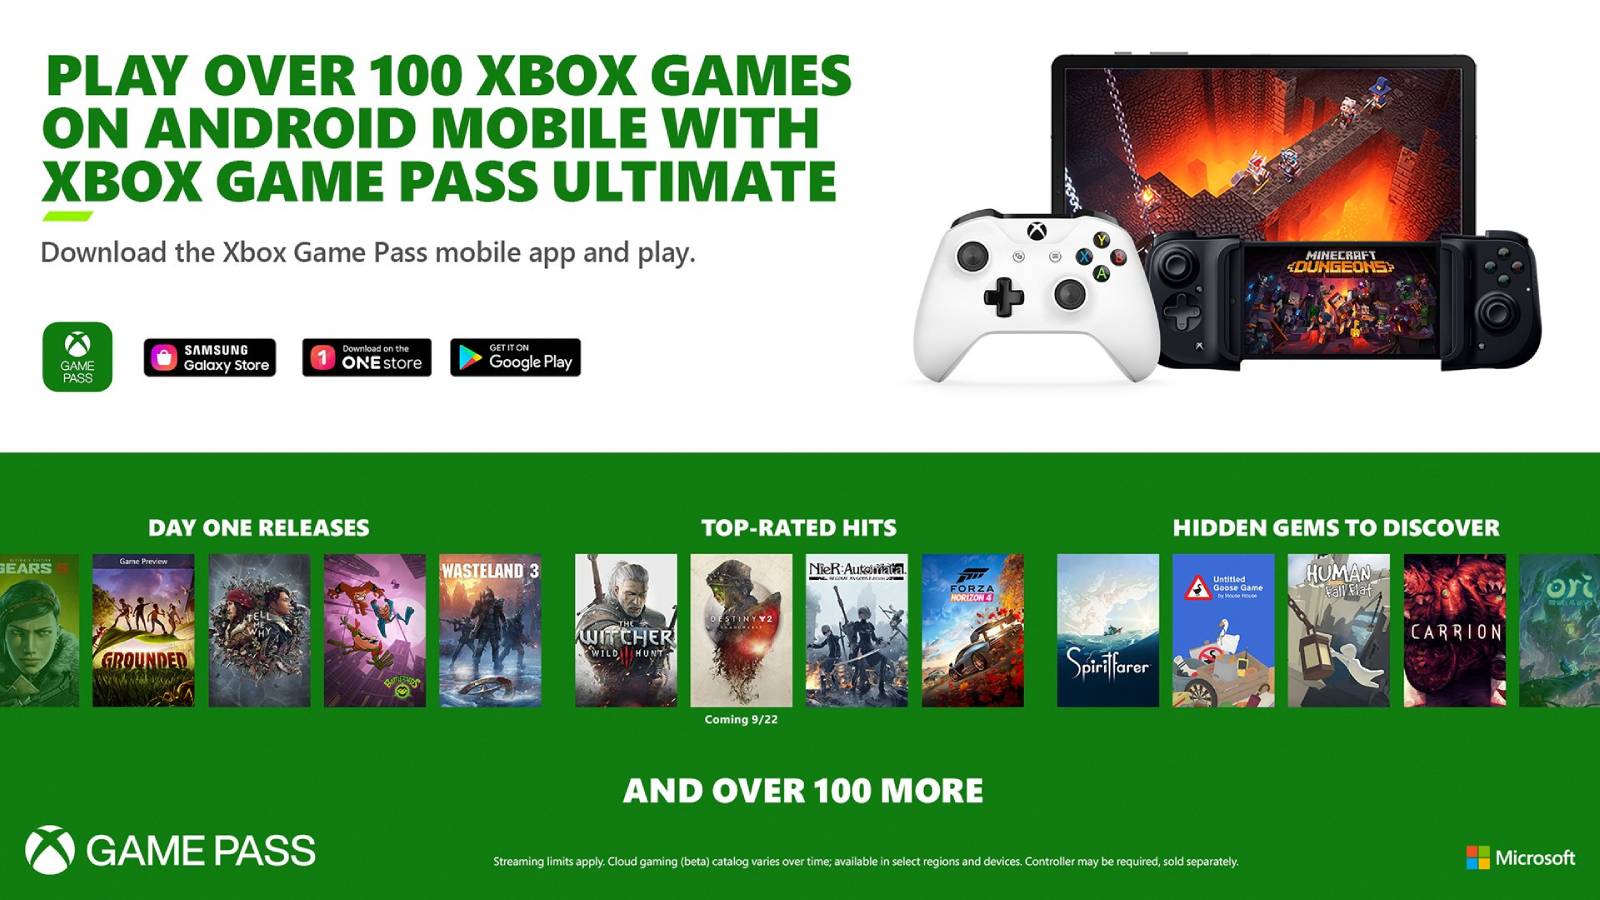 With Game Pass Ultimate, PC gamers have no need for the Xbox Series X